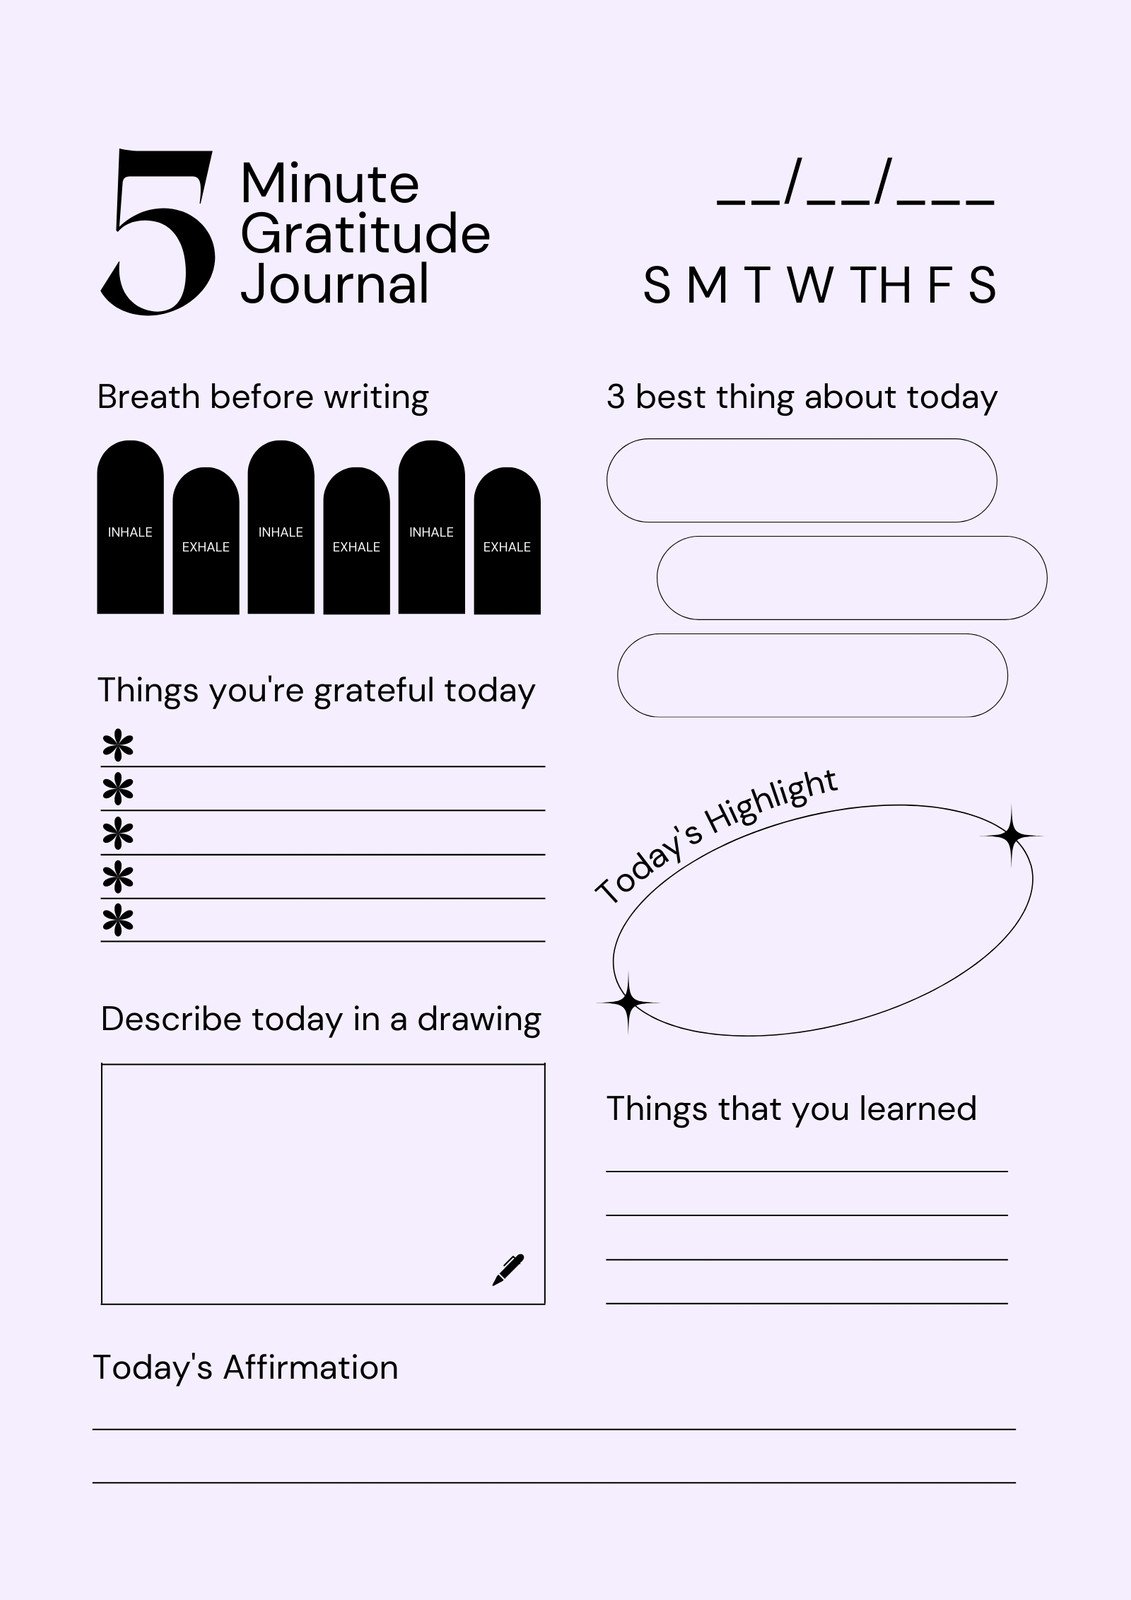 Gratitude Journal: How To Start, Templates, Ideas, Tips & Guides